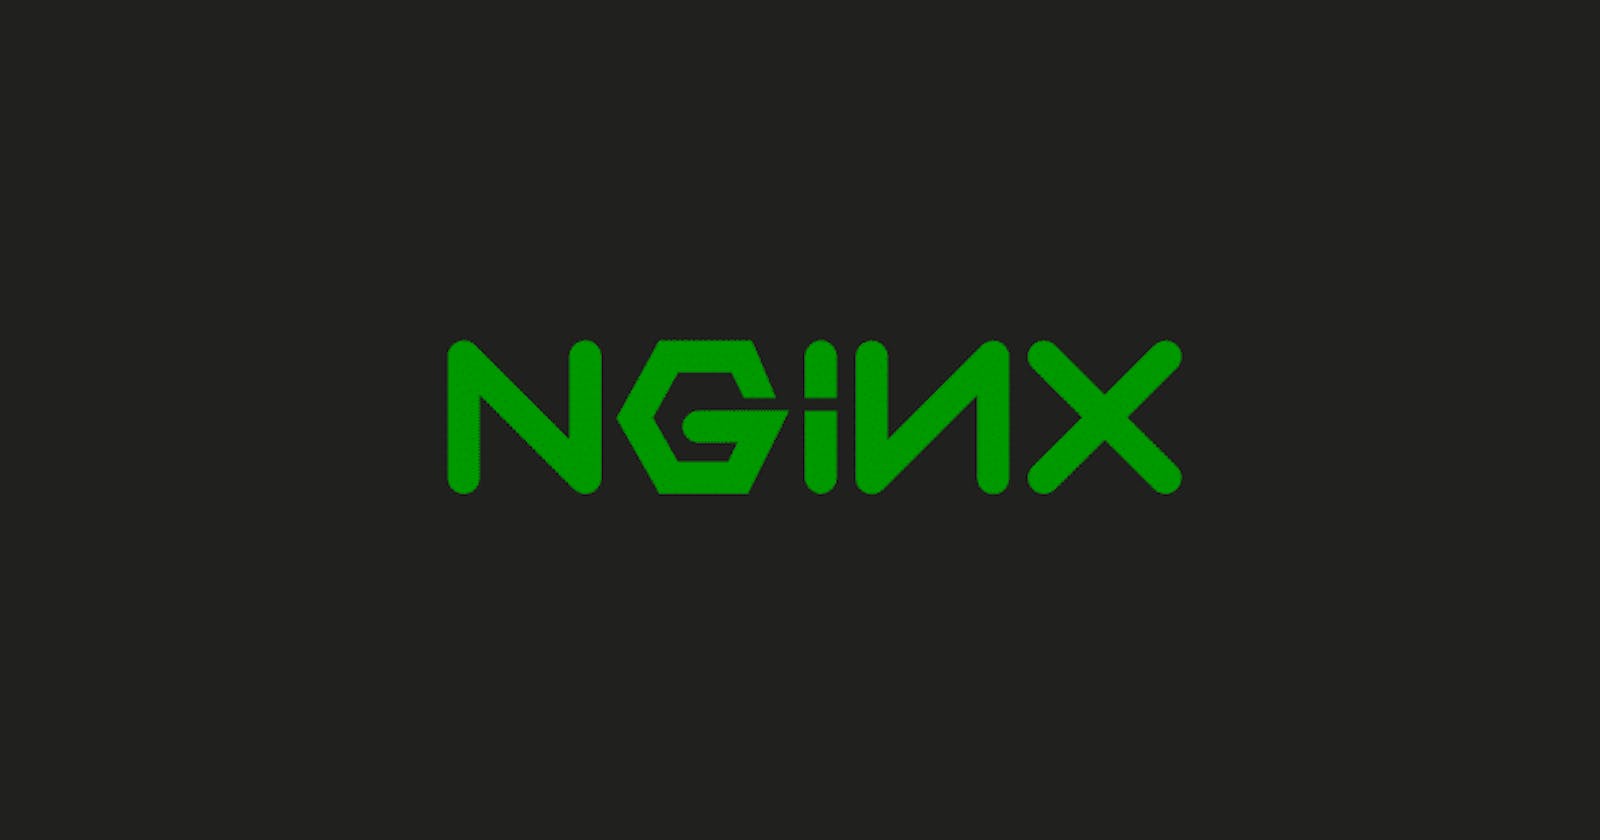 Level Up Your Website Performance with Nginx's GeoIP Routing and Proxy Caching.